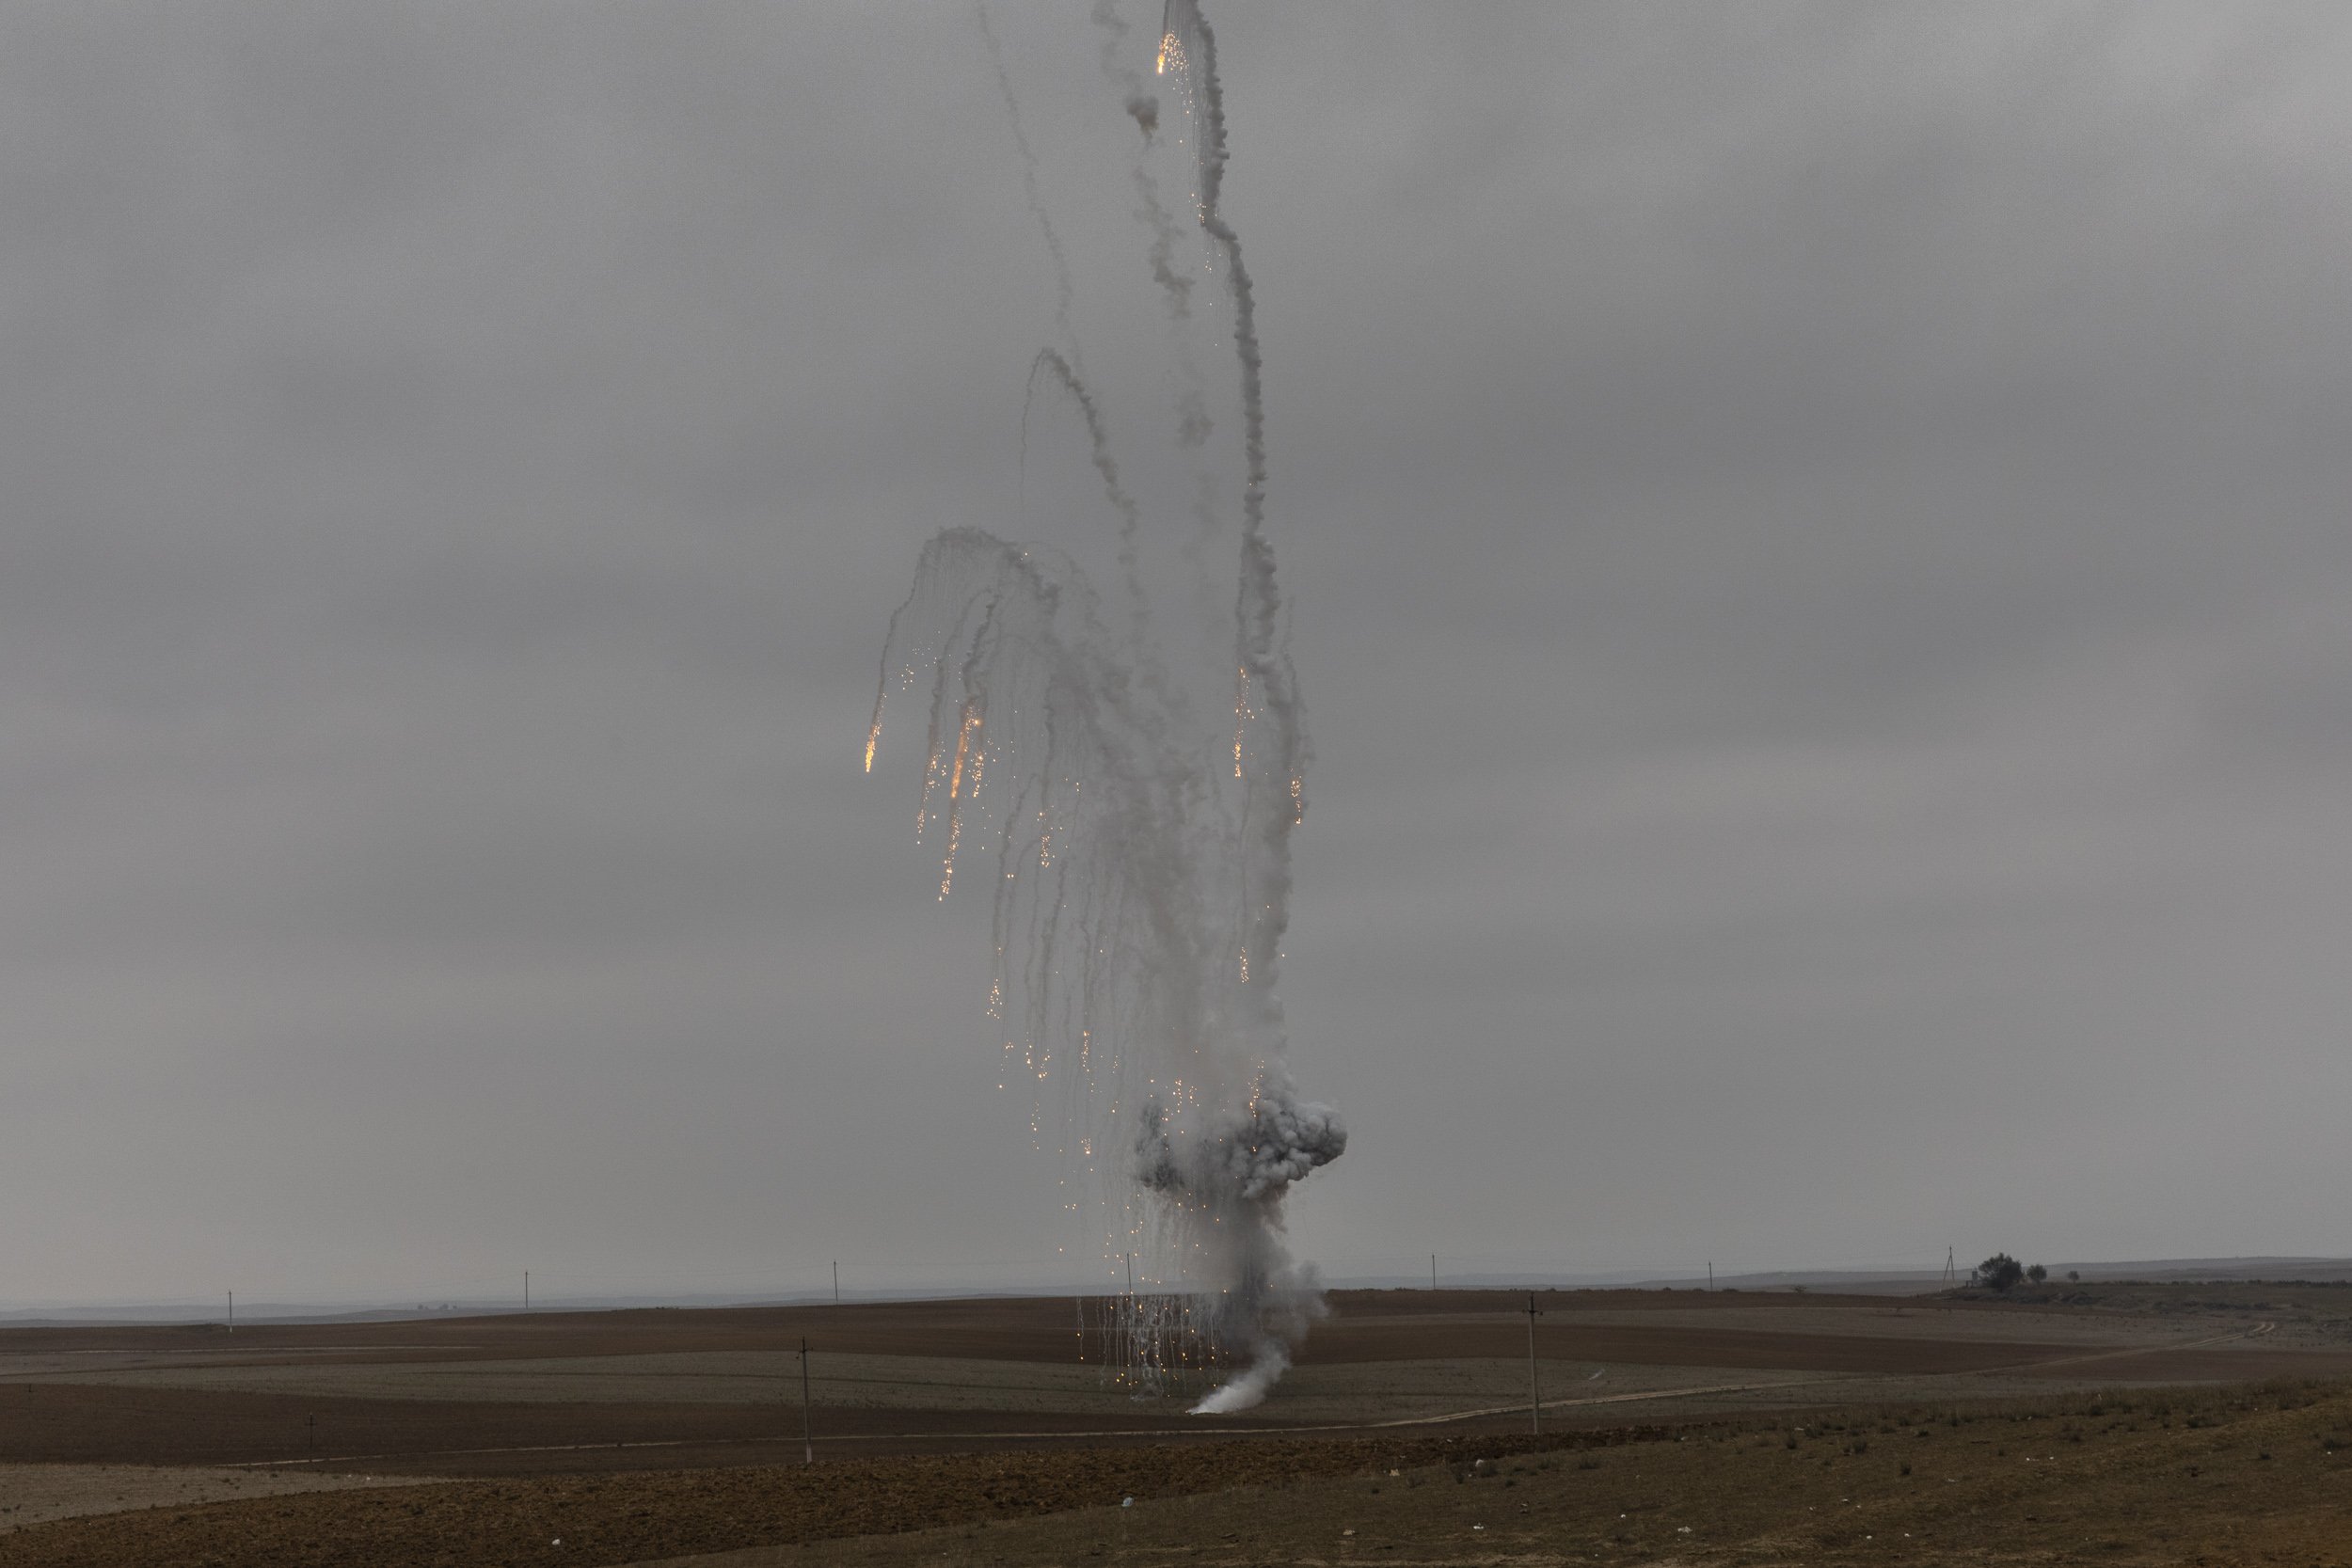  Azerbaijani bomb disposal experts detonated an incendiary explosive that had failed to explode after being fired by Armenian forces at Azerbaijani troops during the 6 week war over Nagorno Karabakh. Fizuli region, Azerbaijan. 